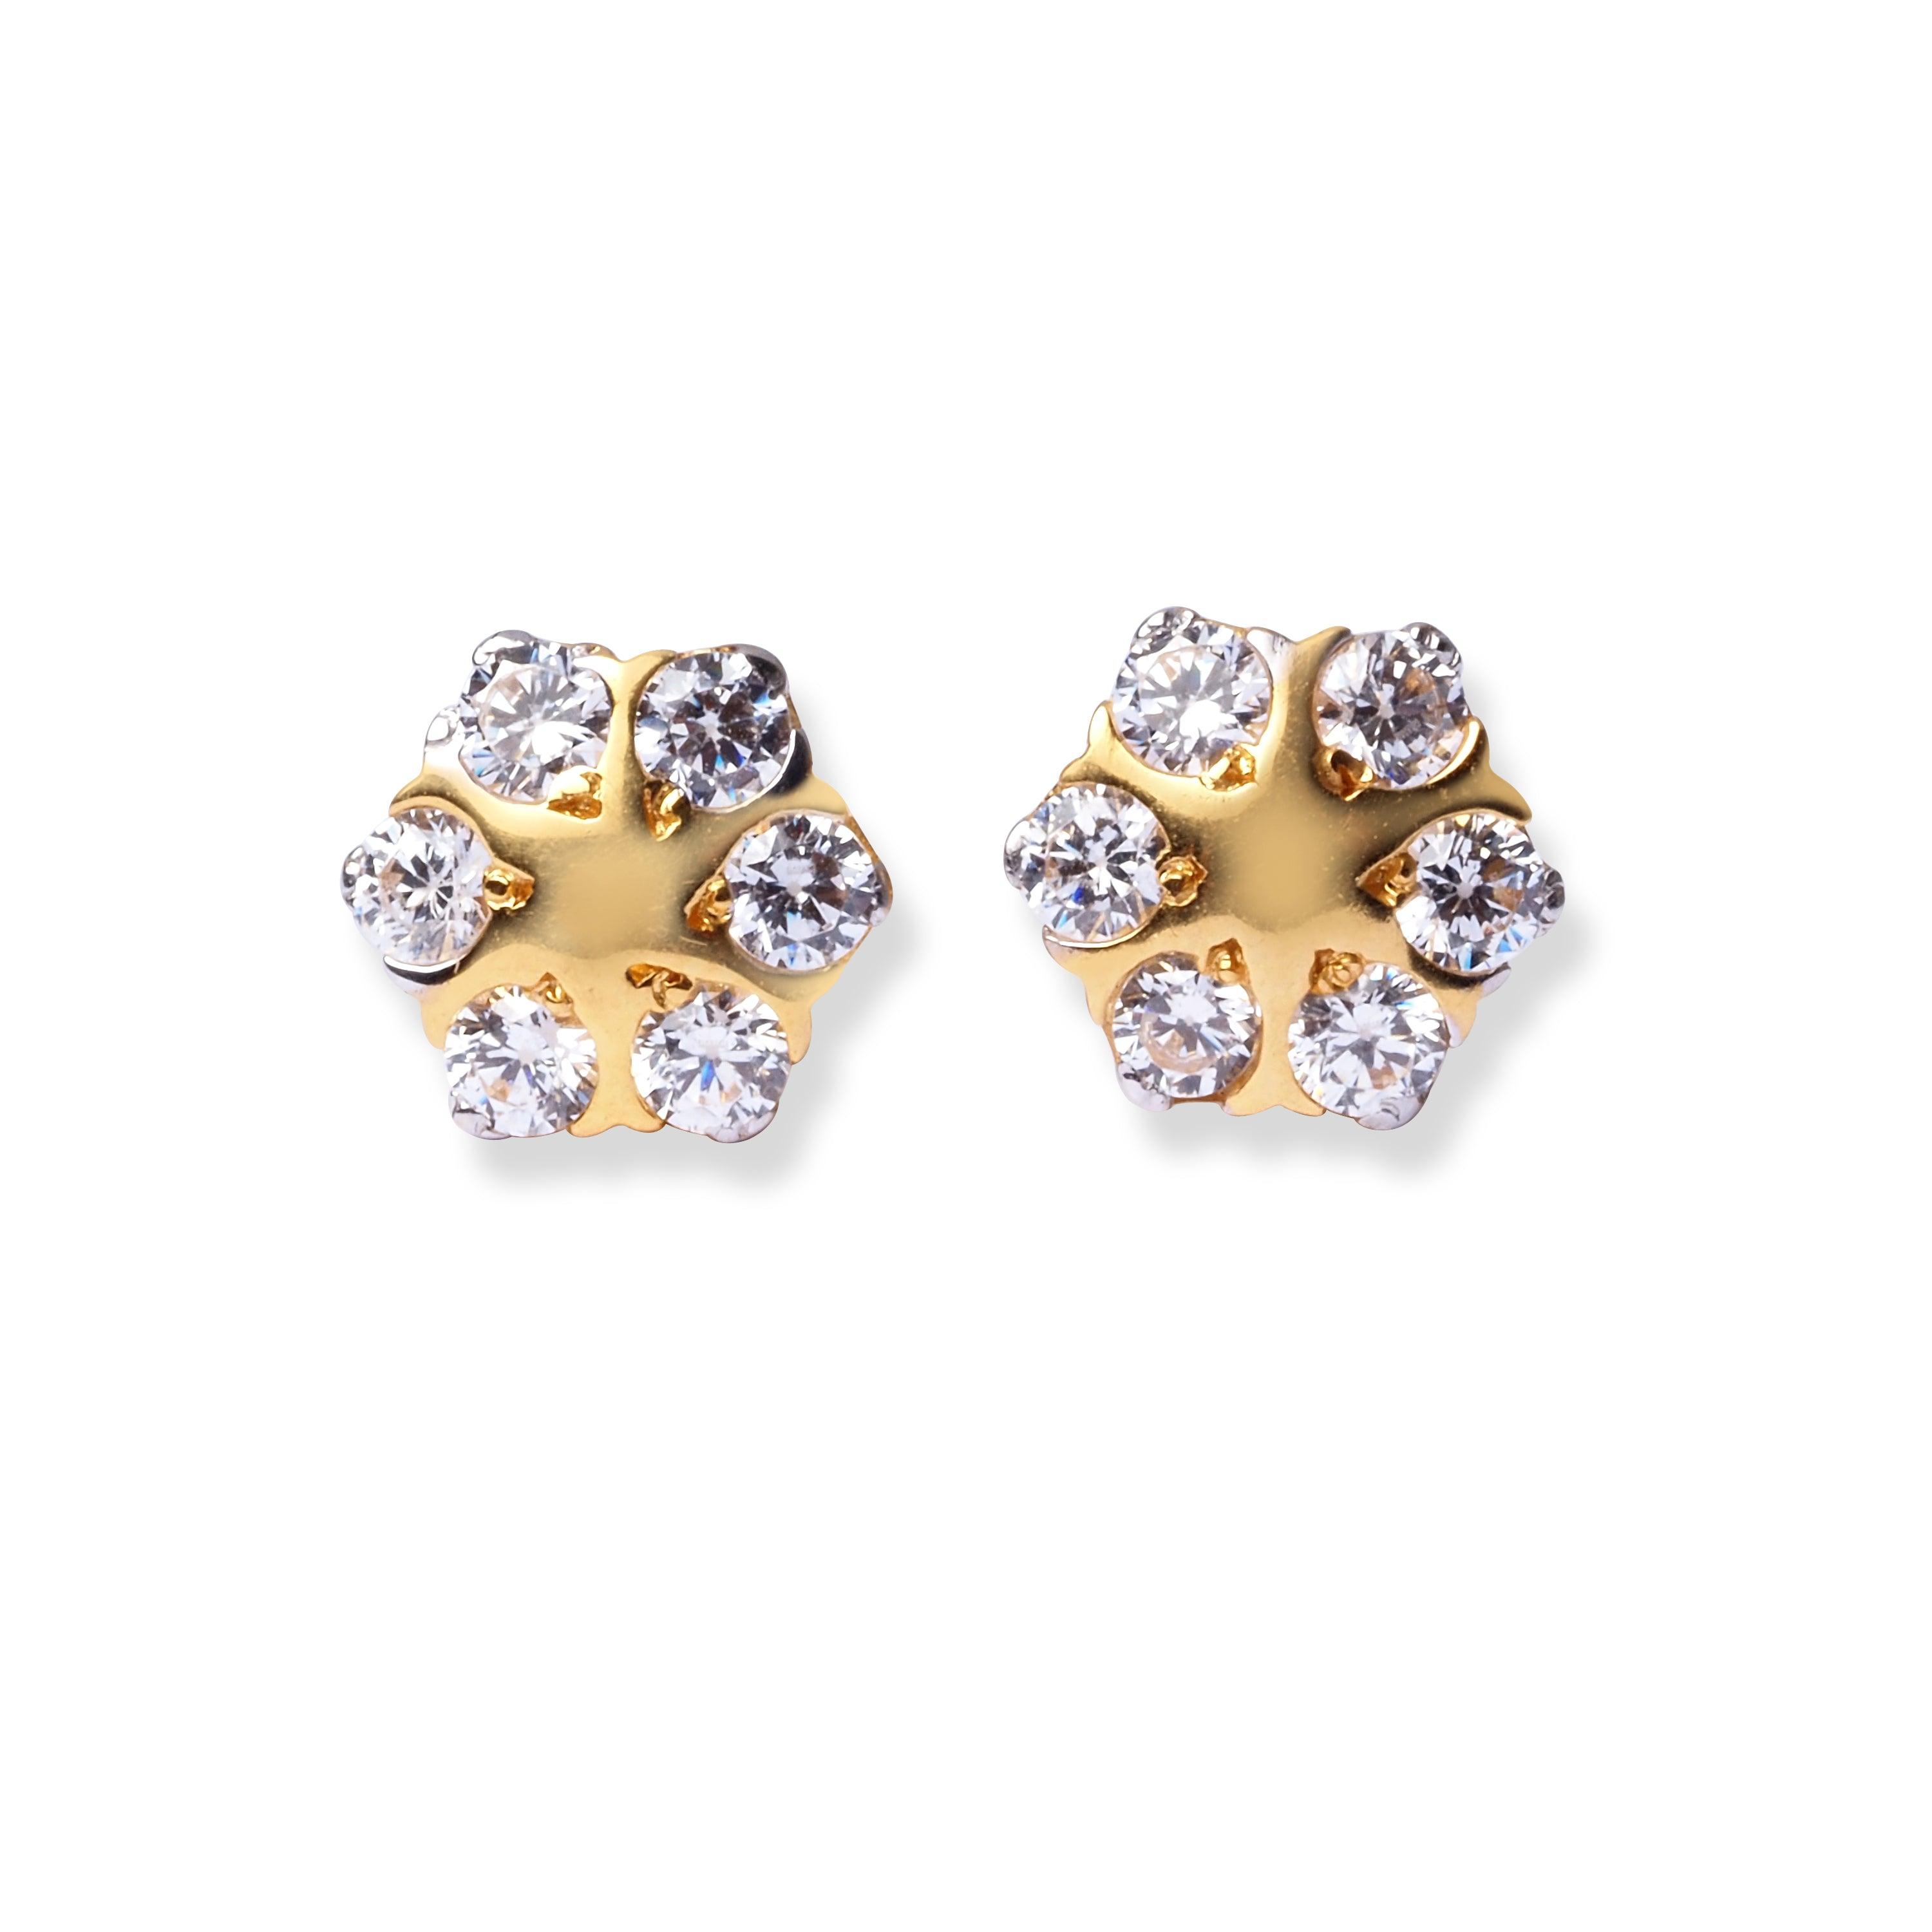 22ct Gold Flower Stud Earrings with Cubic Zirconia Stones E-7966 - Minar Jewellers